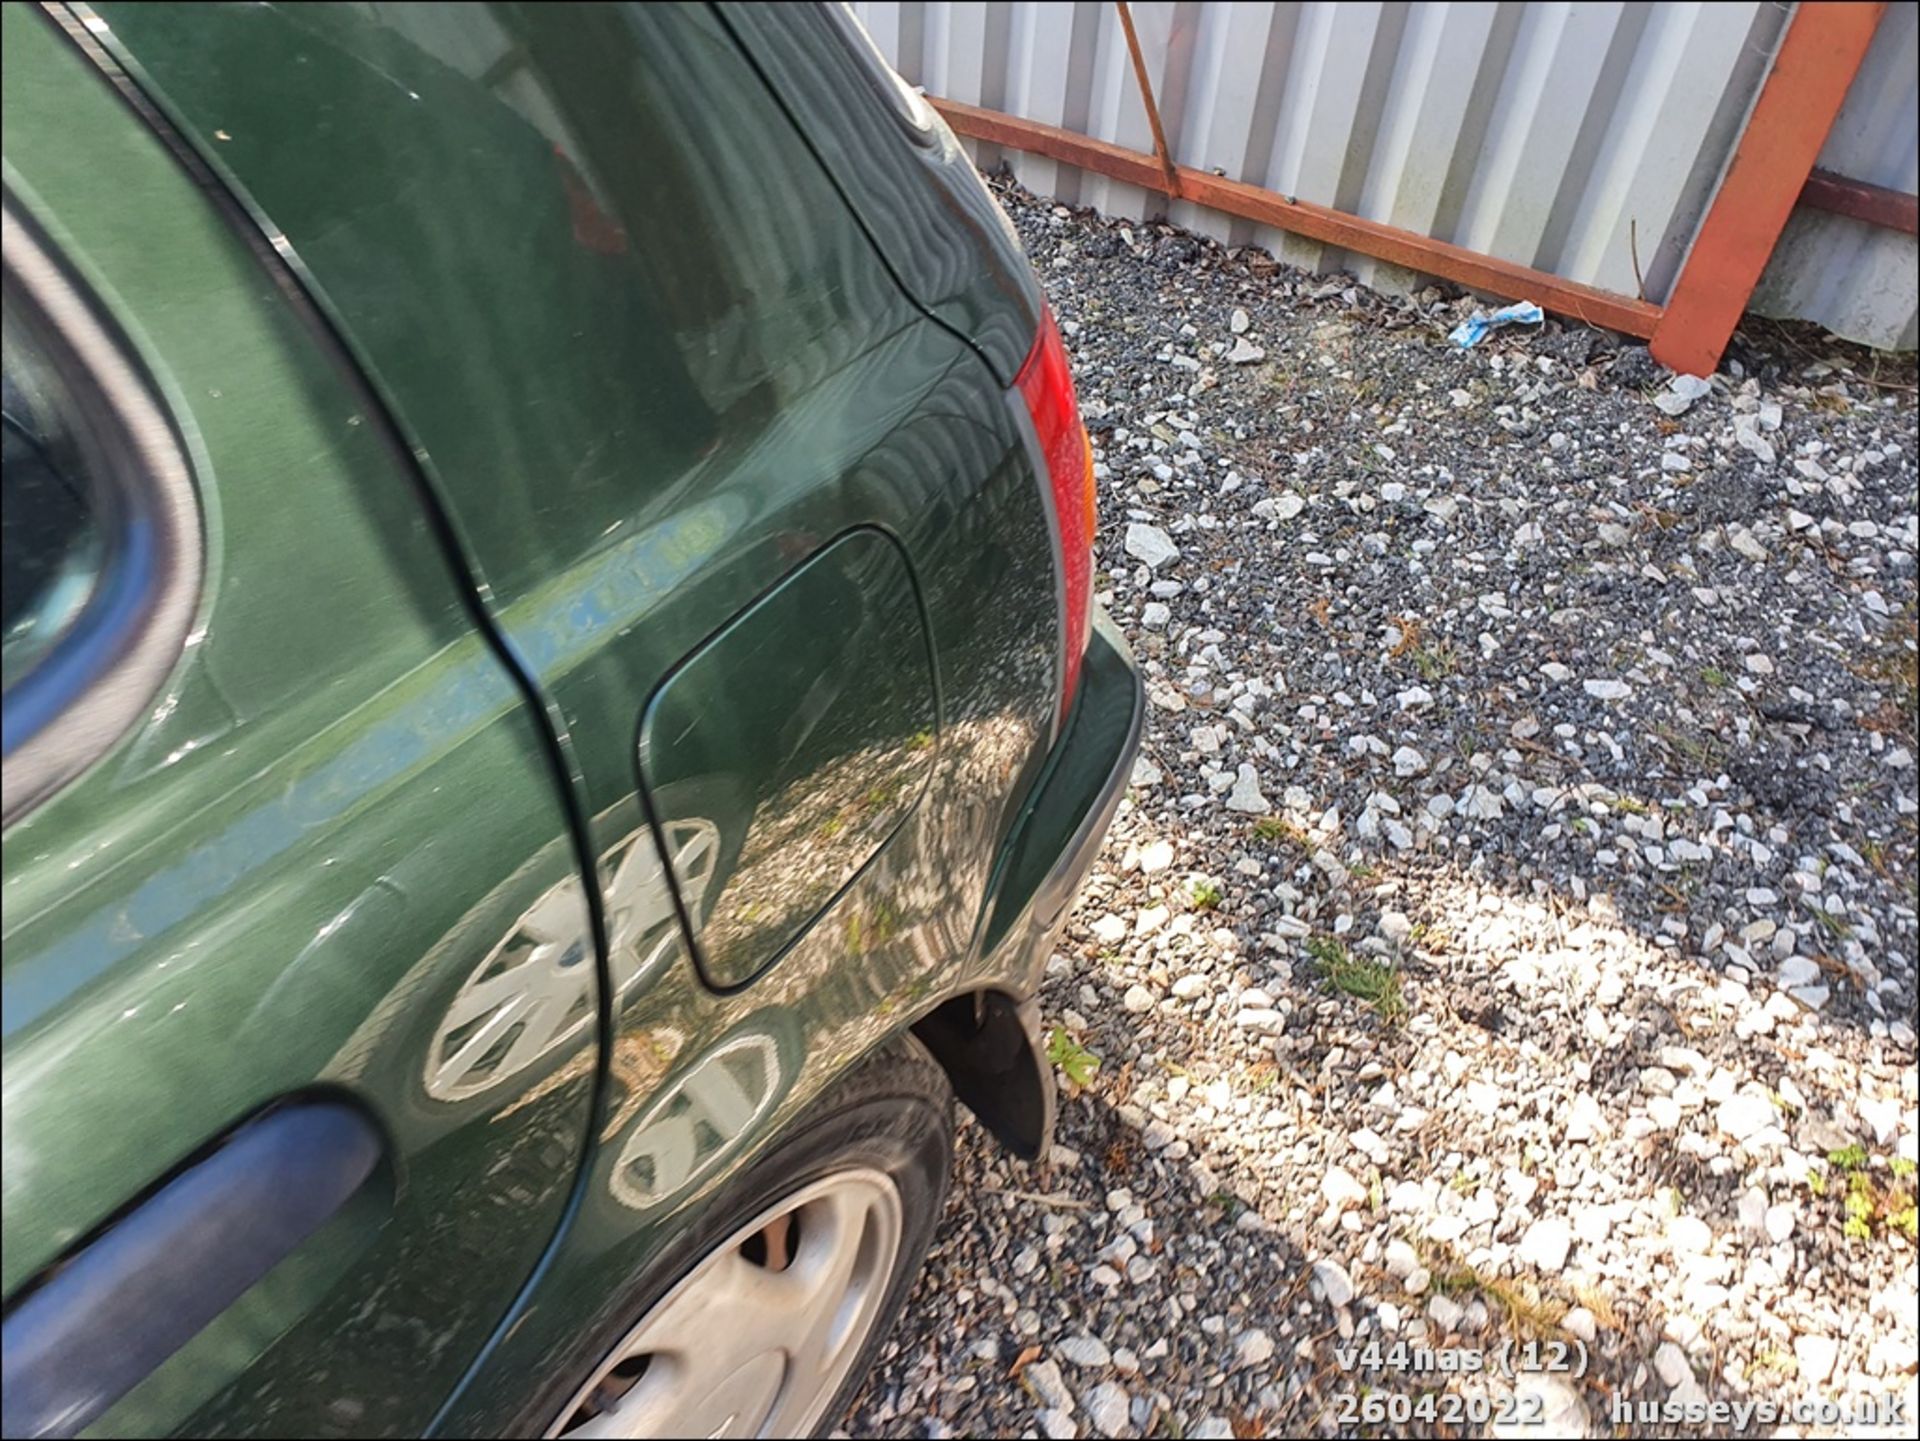 1999 NISSAN MICRA GX AUTO - 1275cc 5dr Hatchback (Green) - Image 12 of 21